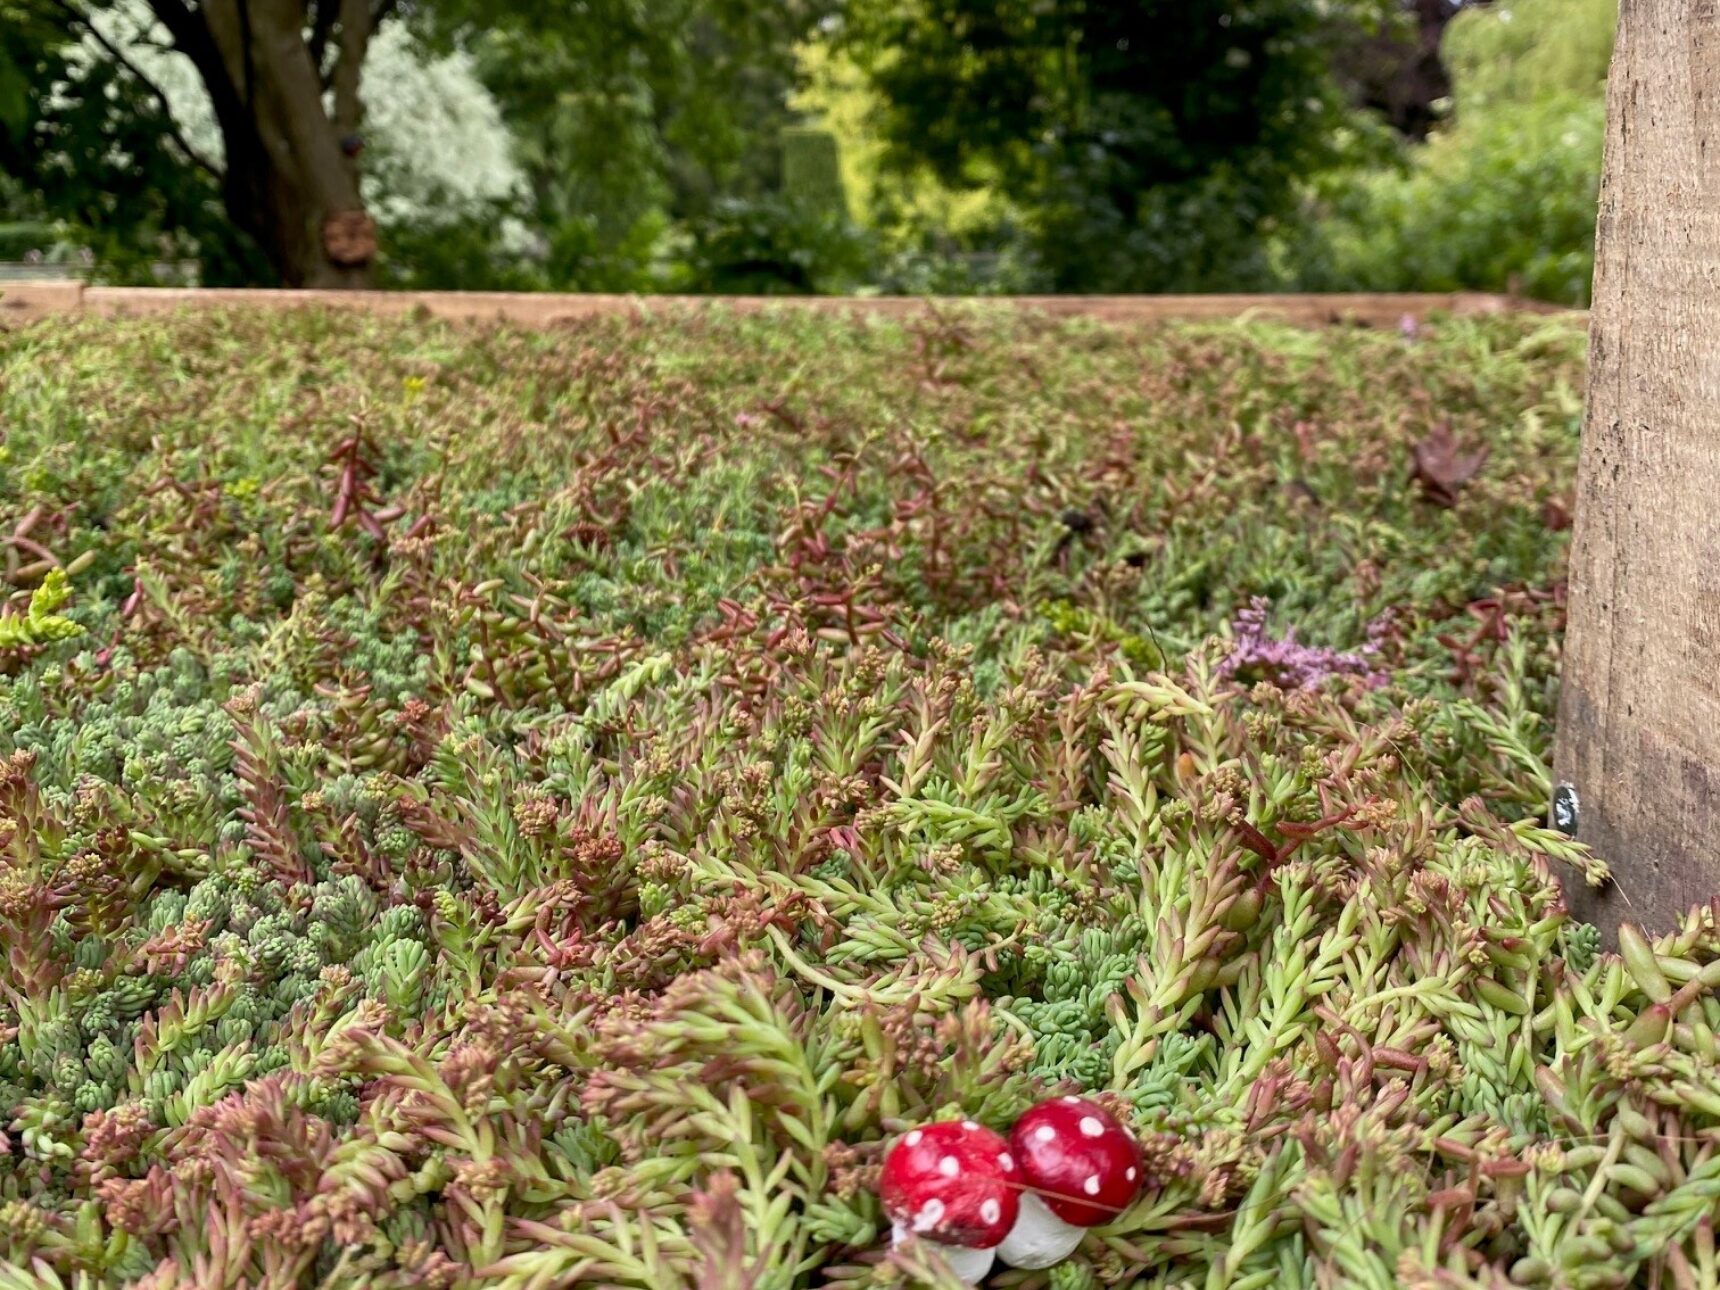 The sedum roof offers a great food source for bees, butterflies, hoverflies and moths